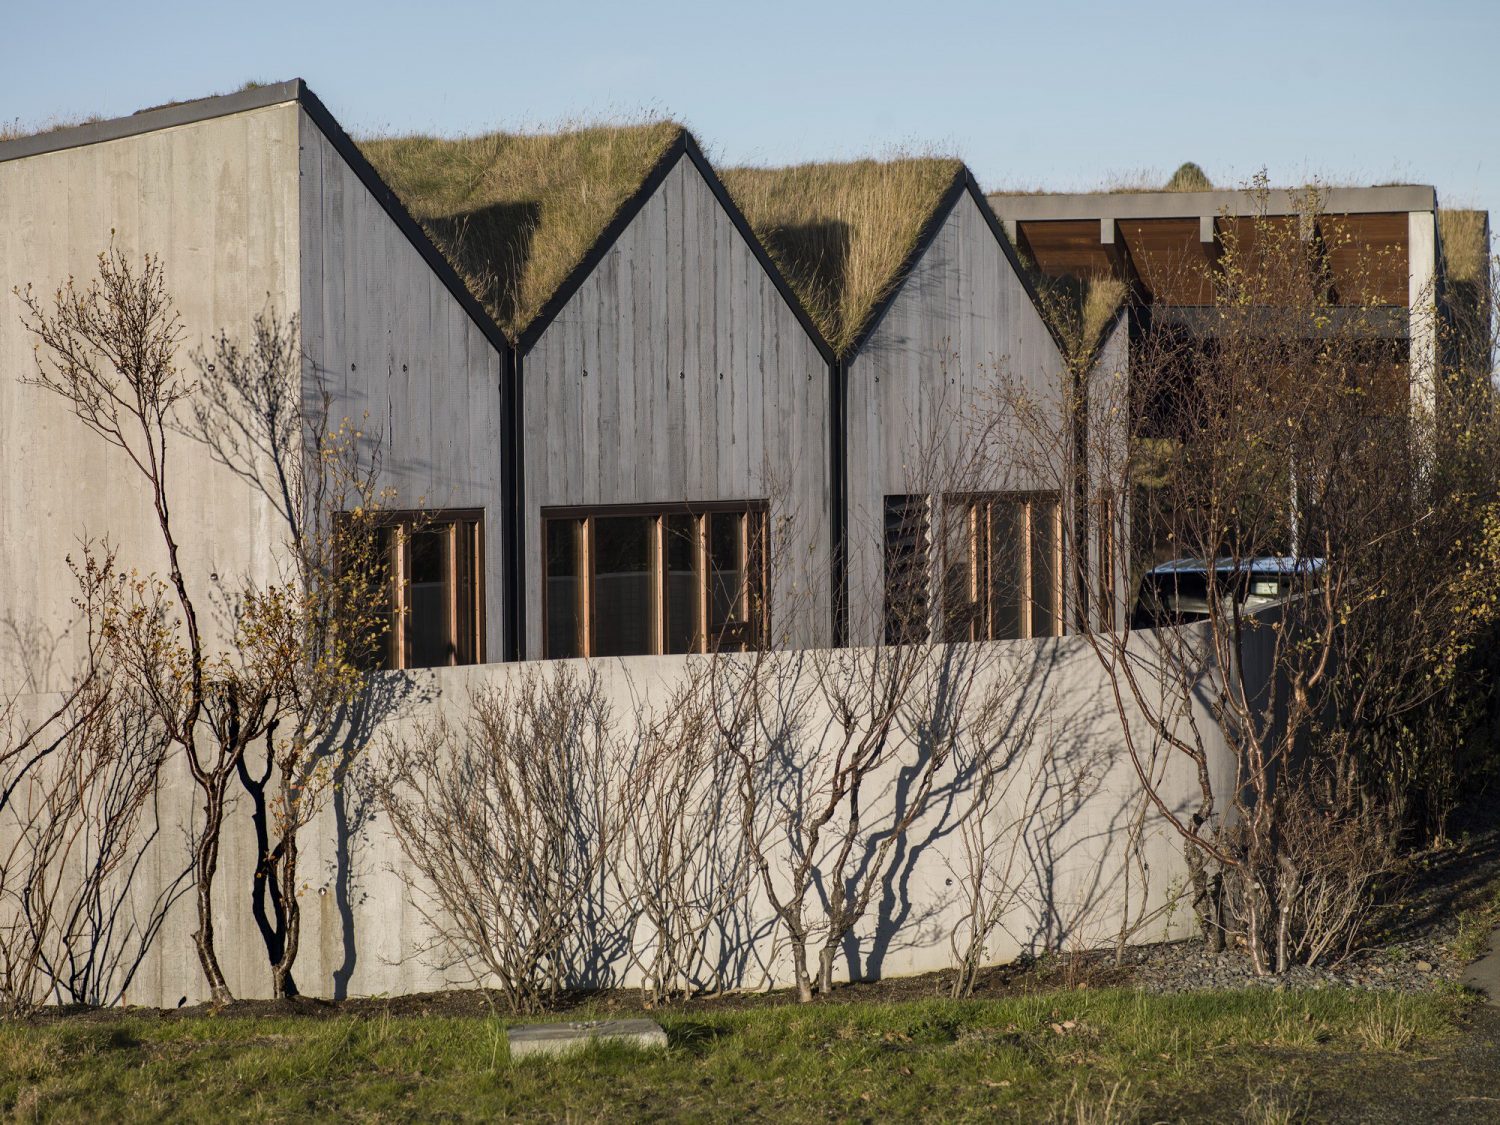 B14 – Icelandic Villa under a Series of Sharply Pitched Green Roofs